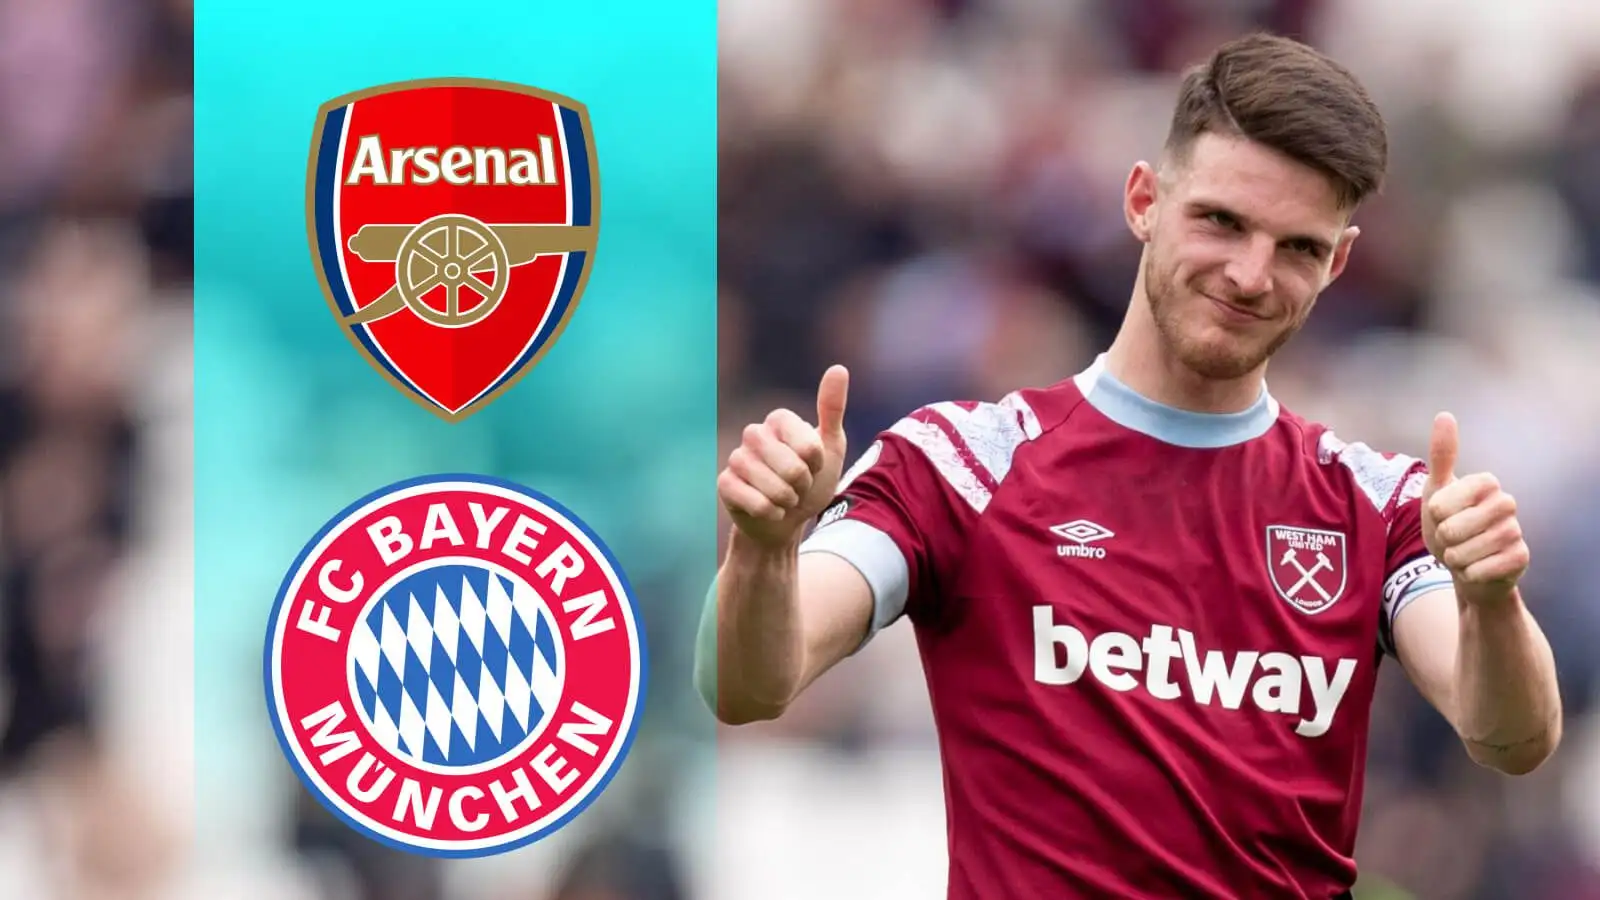 Declan Rice with the Arsenal and Bayern Munich badges